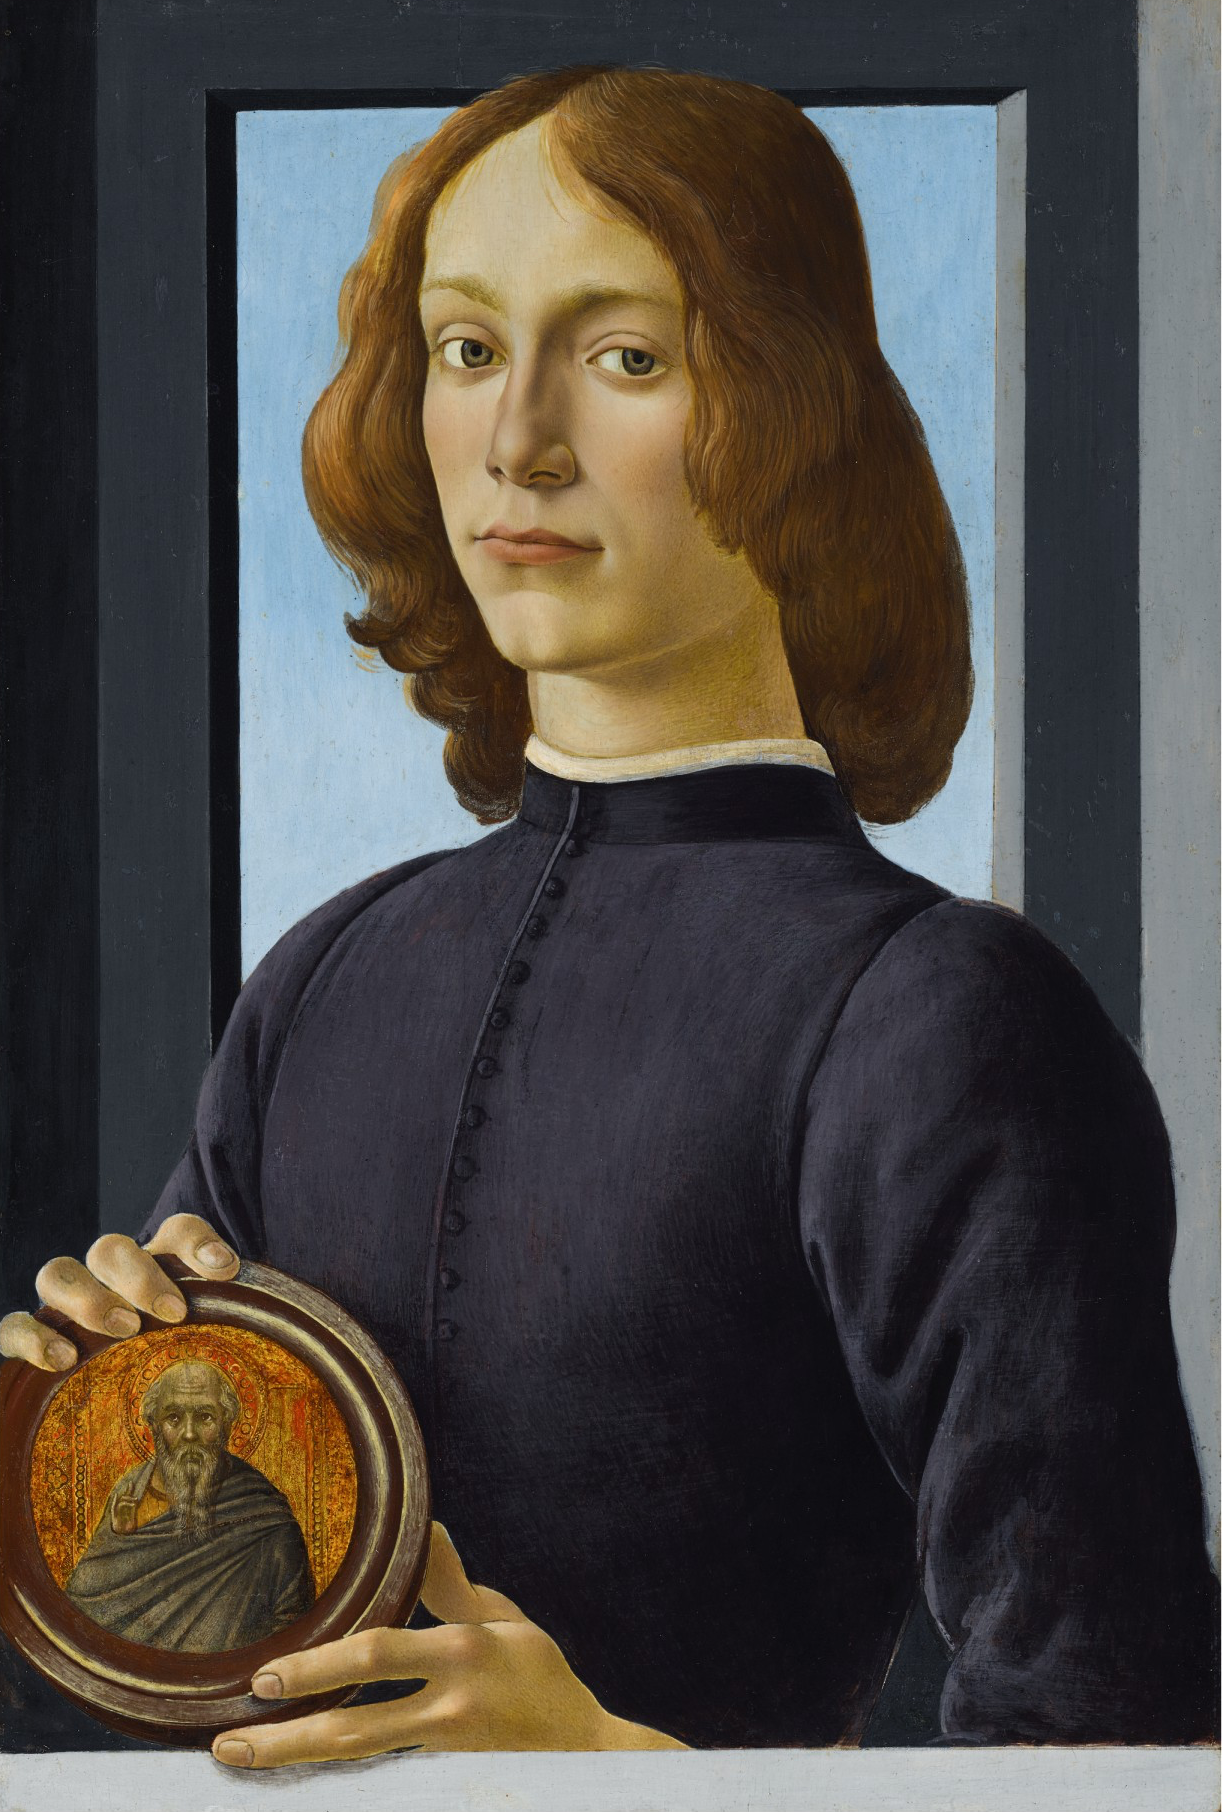 Portrait of a Young Man Holding a Roundel by Sandro Botticelli - c. 1470-1480 - 58.4 x 39.4 cm private collection